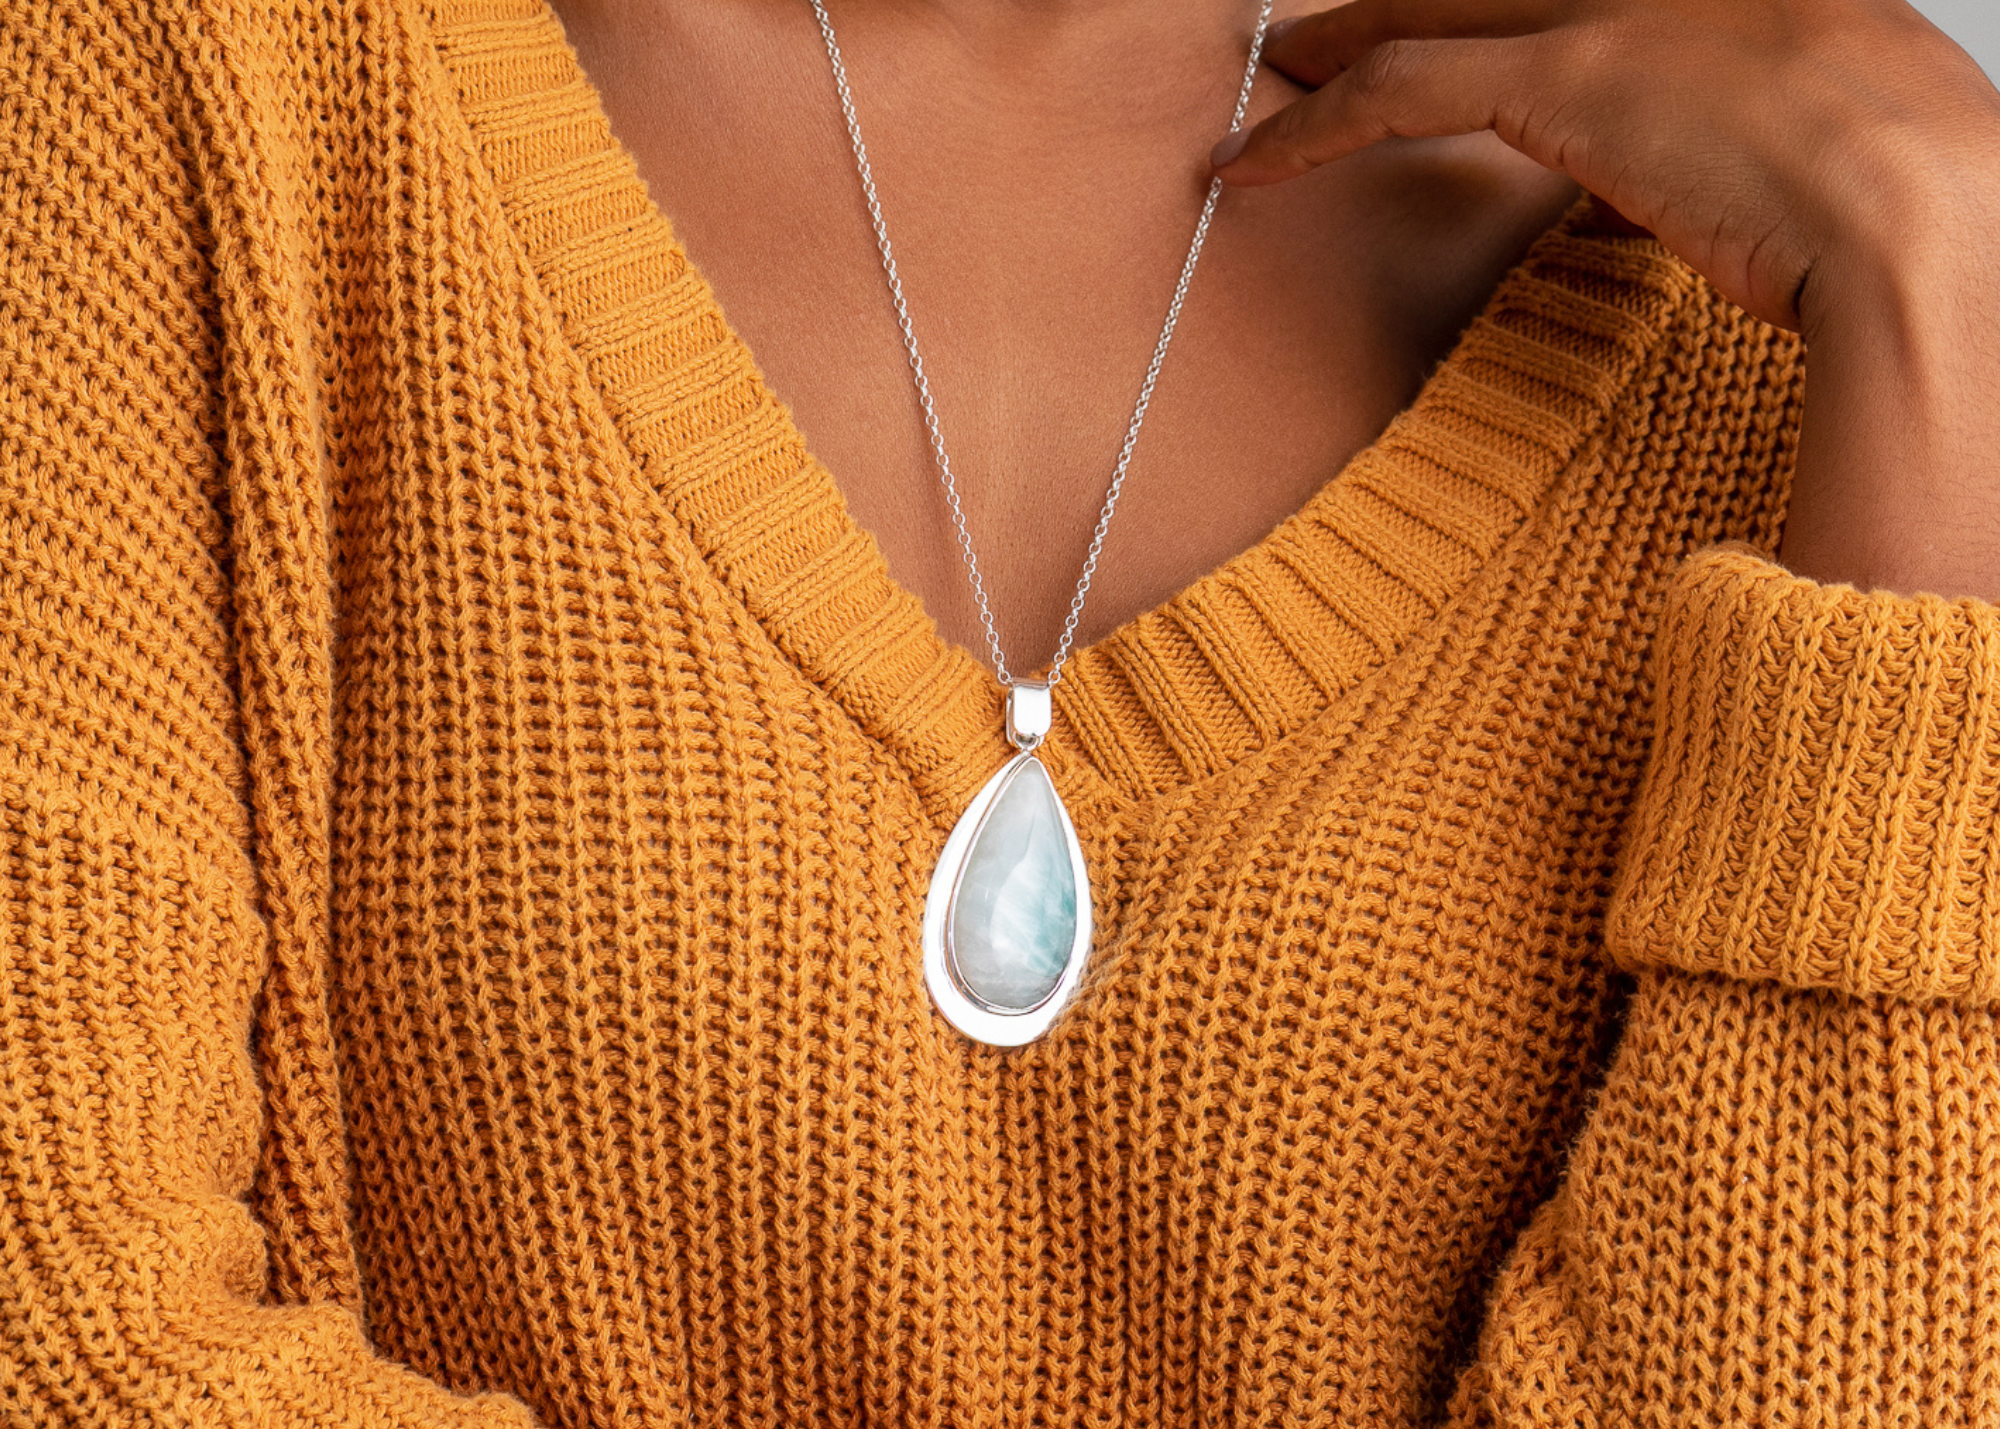 White Larimar pendants and necklaces for sale.